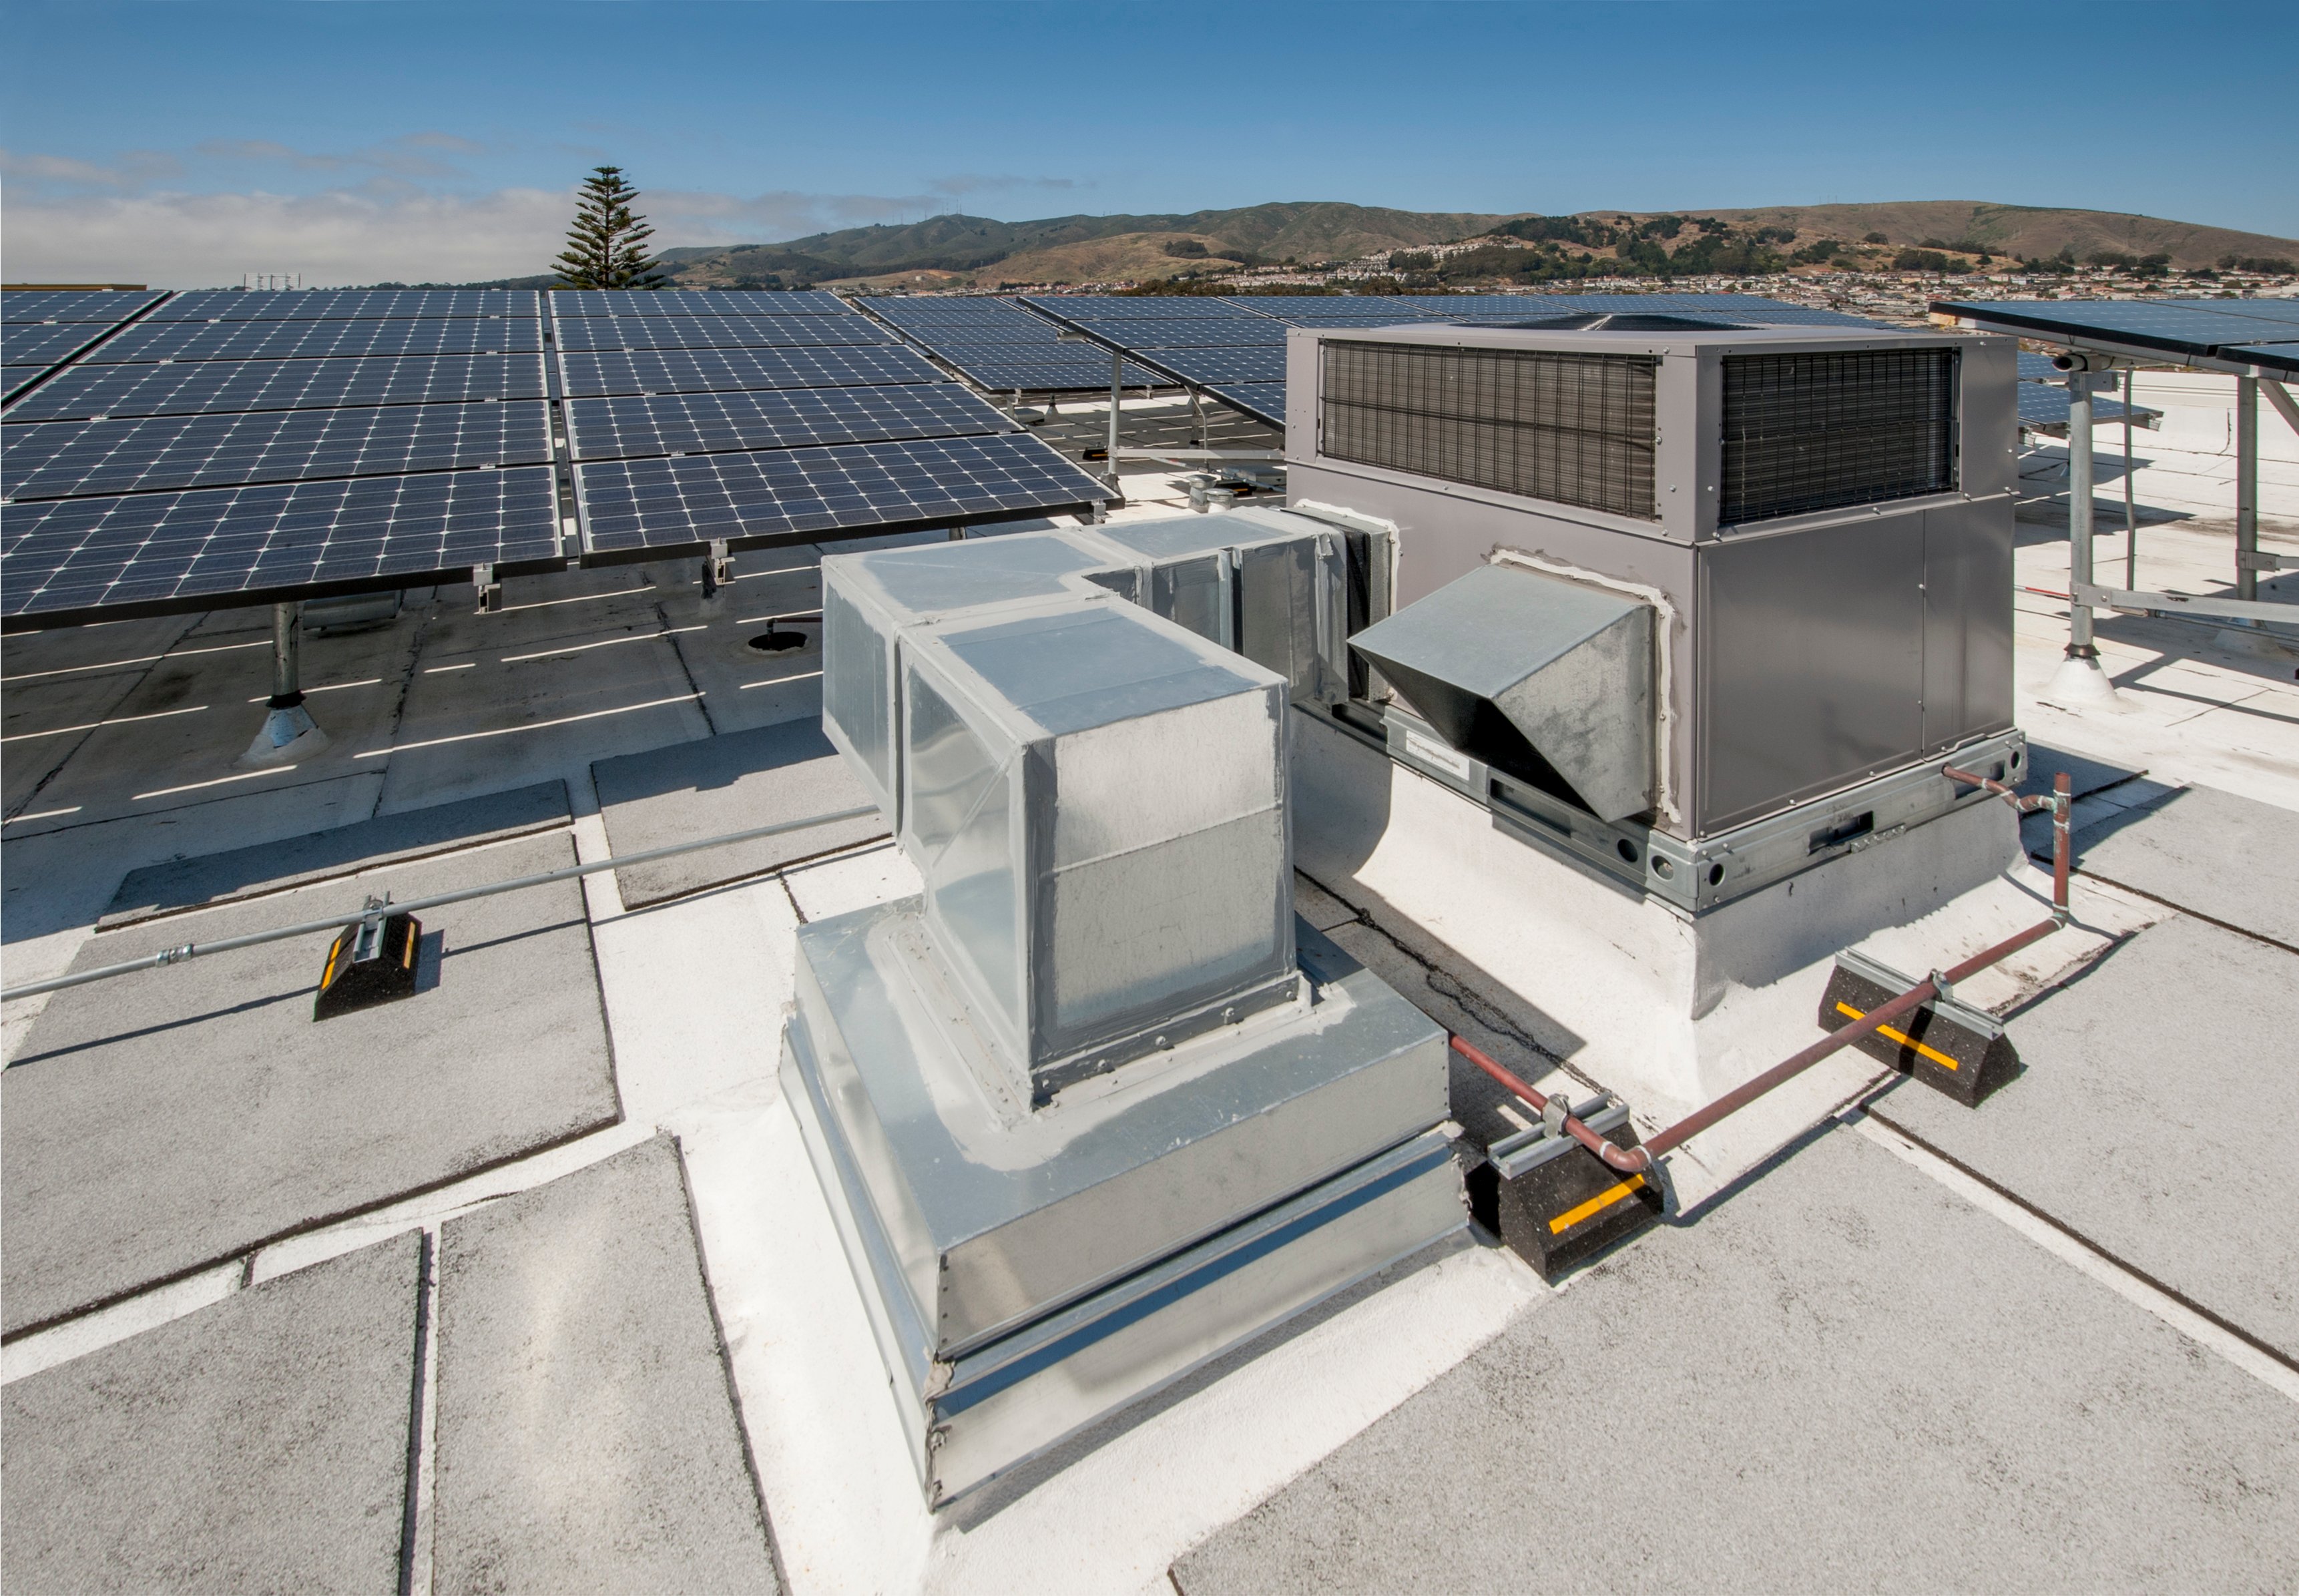 A commercial HVAC system on roof beside rows of solar panels